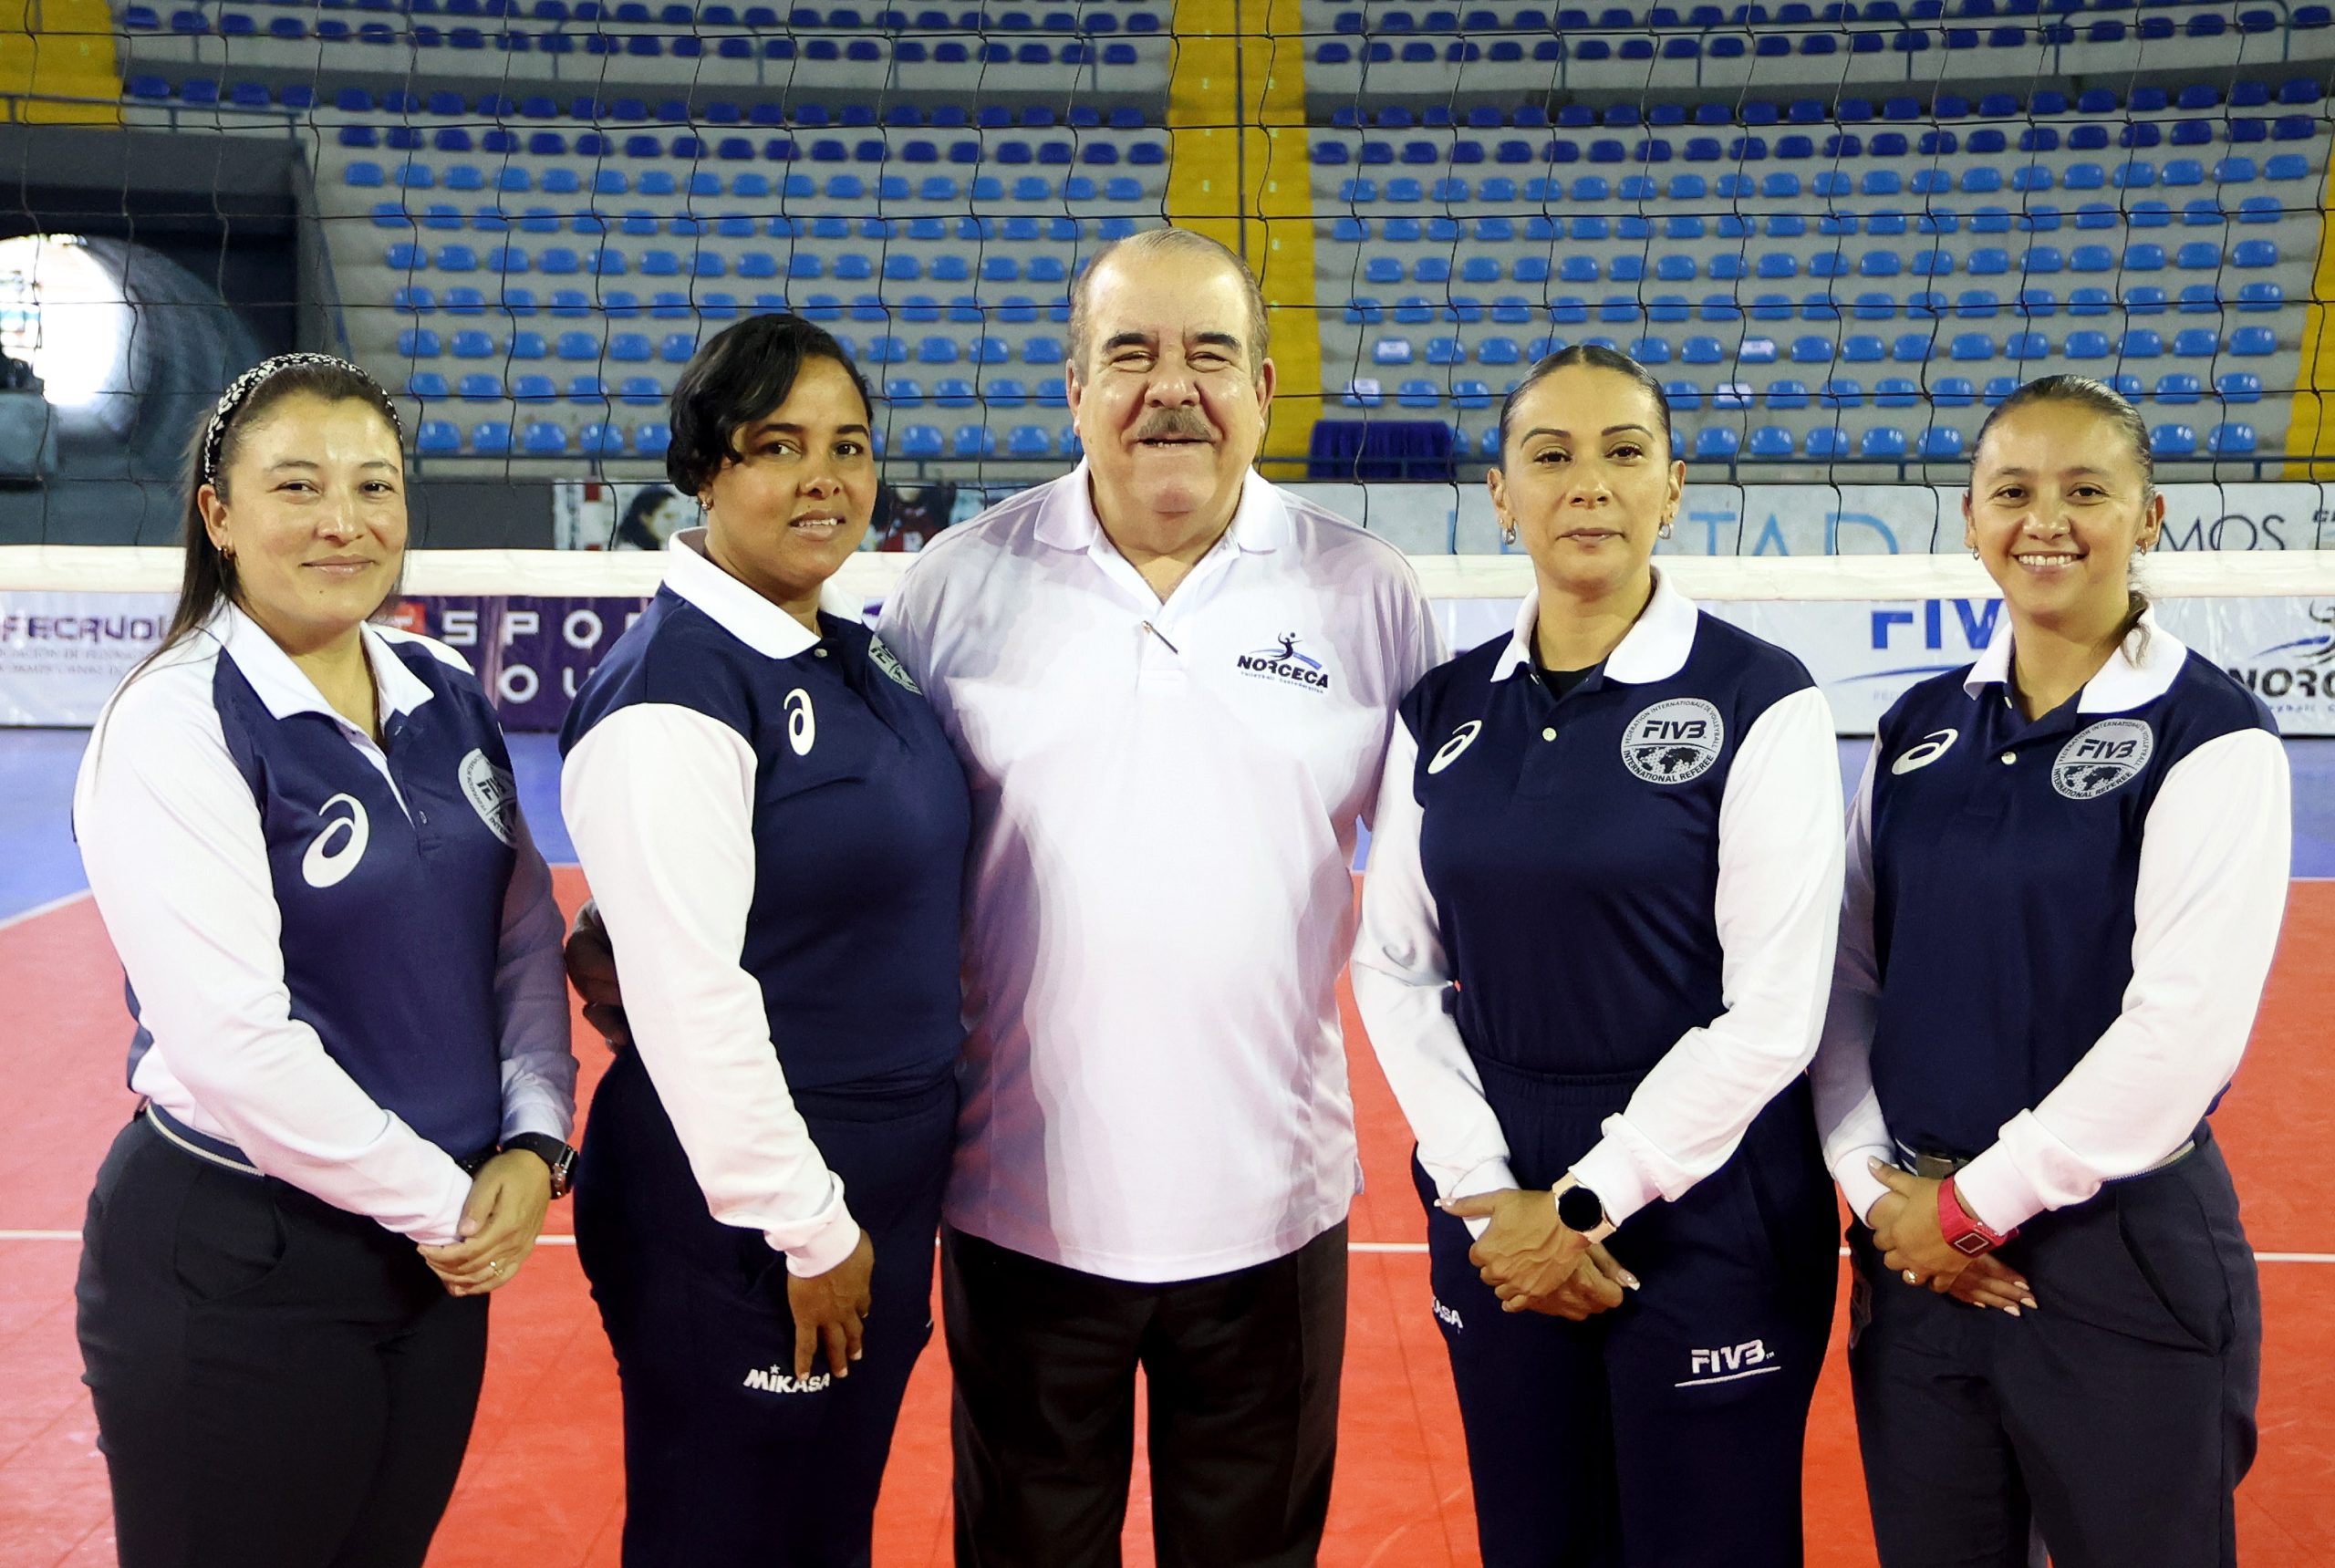 All Female Referees officiate NORCECA Boys U19 Pan Am Cup matches